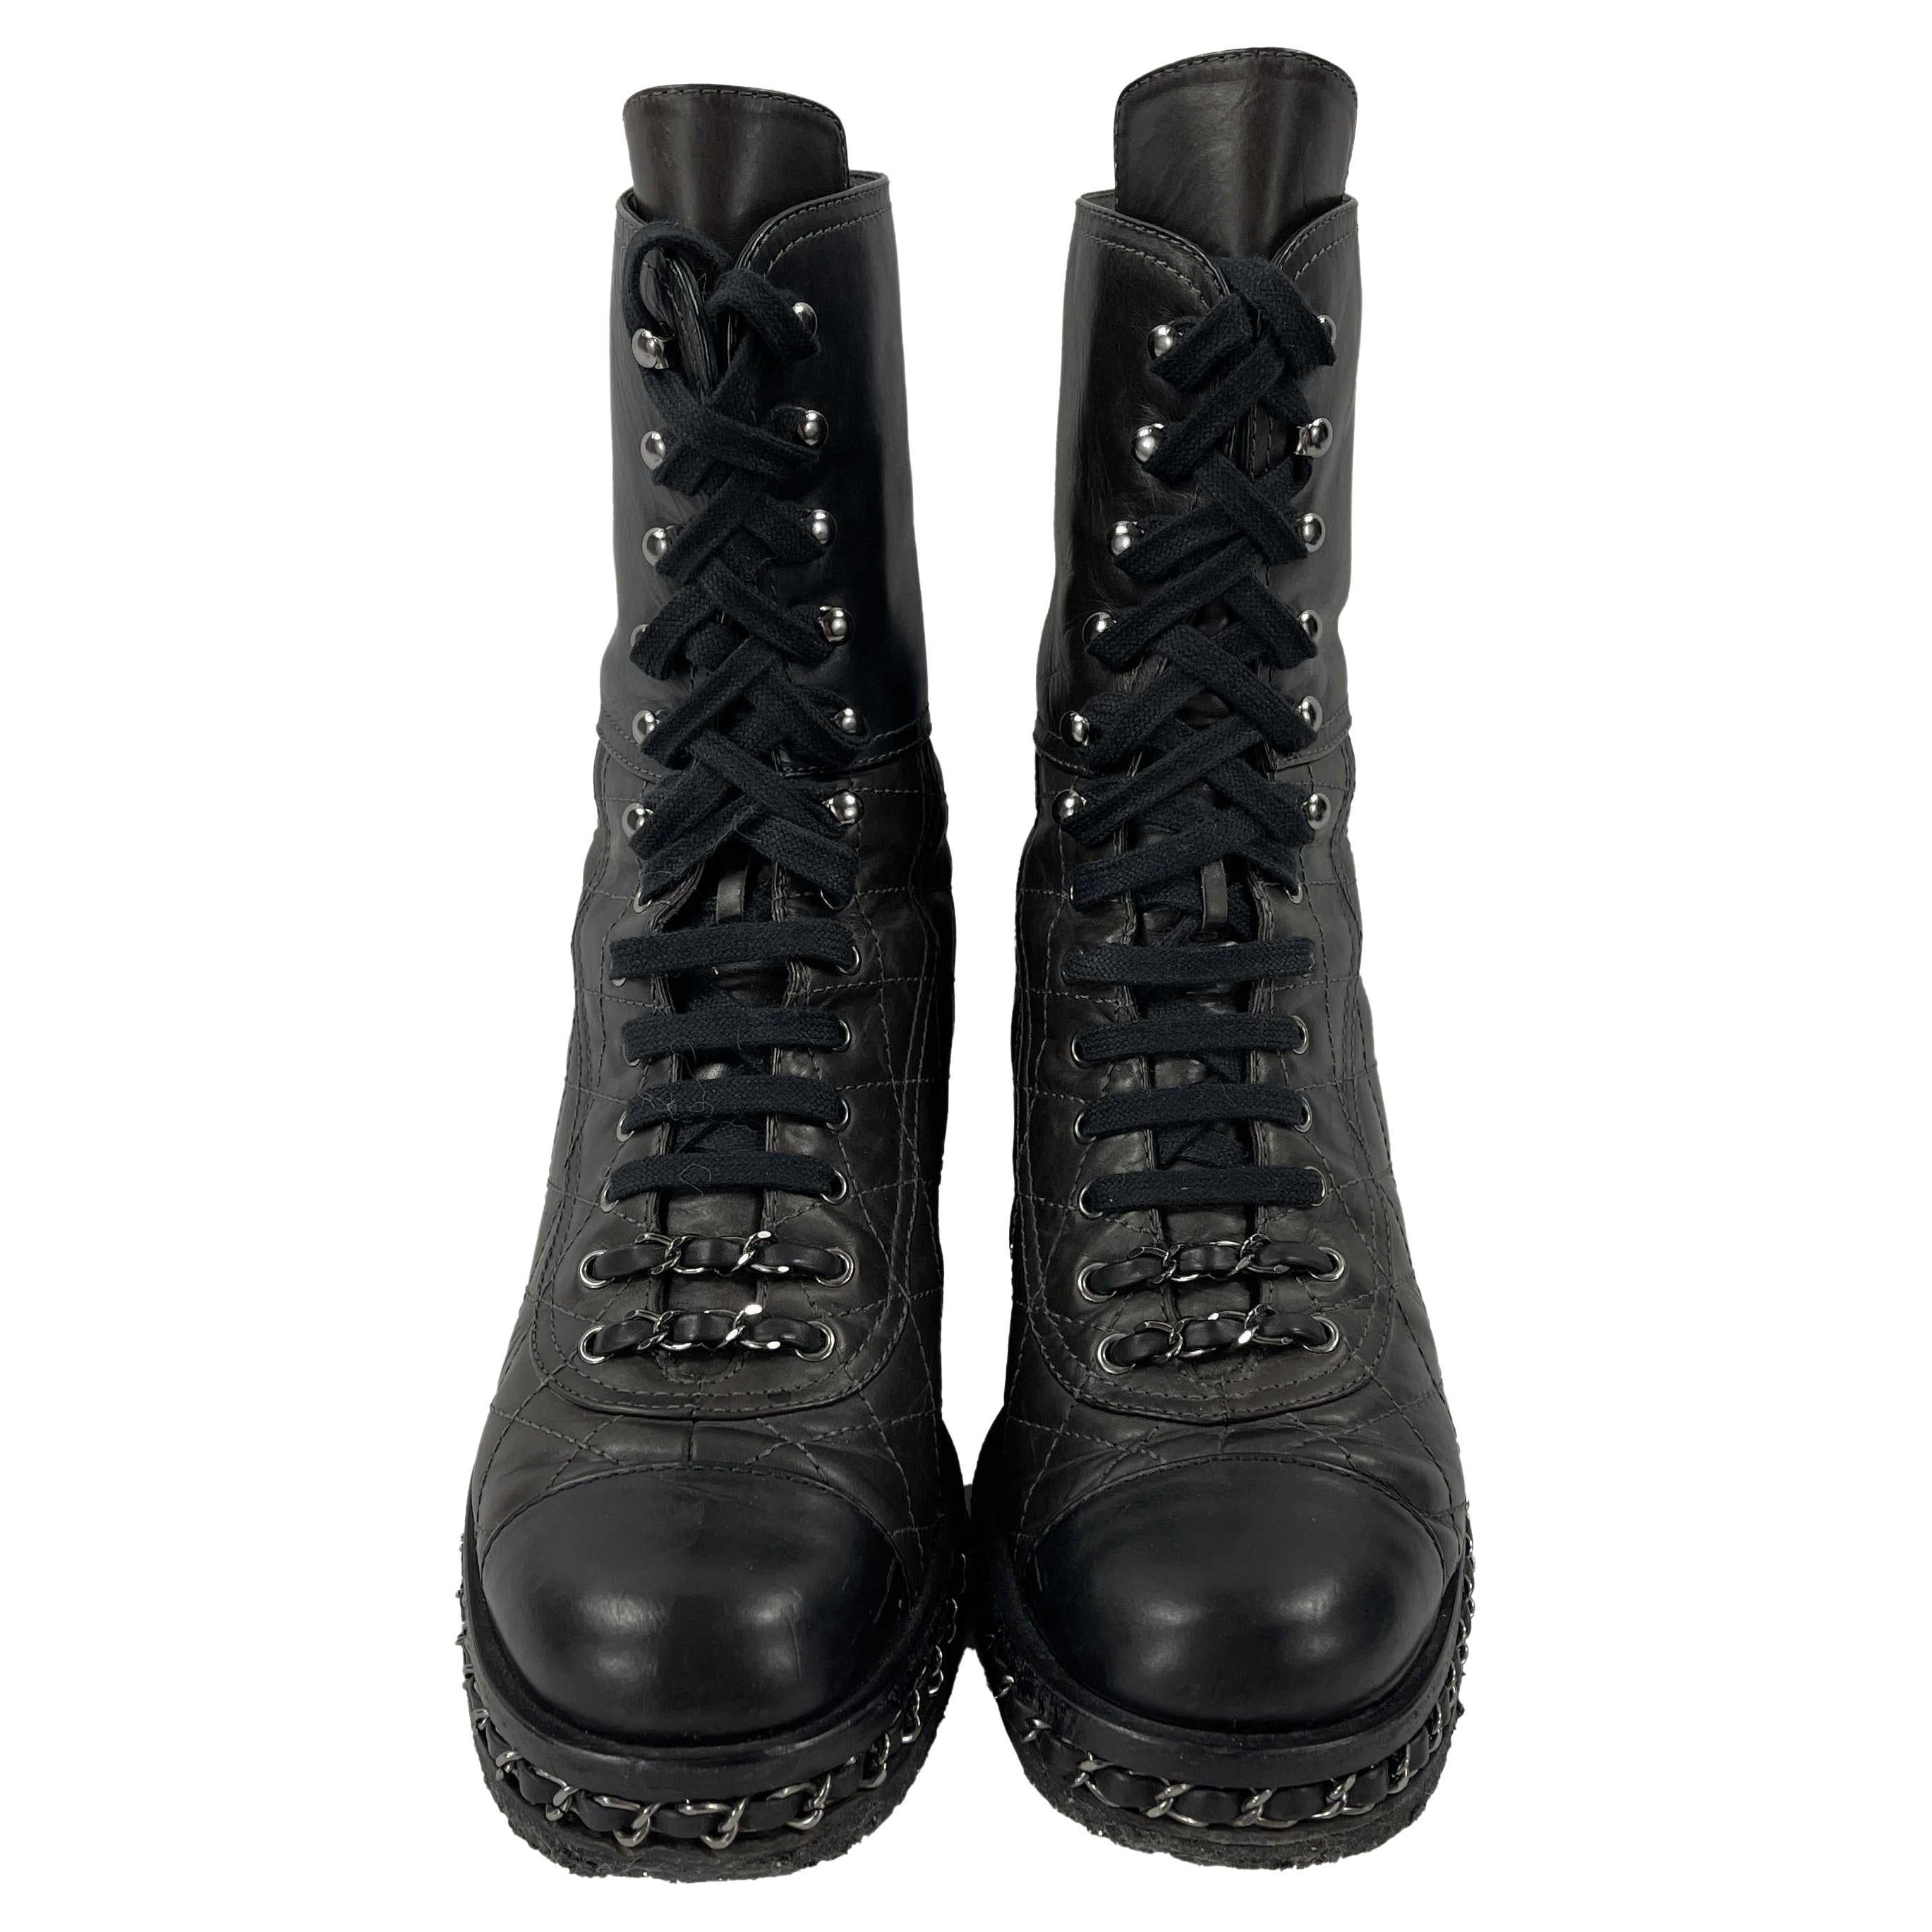 CHANEL Quilted Leather Chain CC Combat Boots 37.5 US 7.5